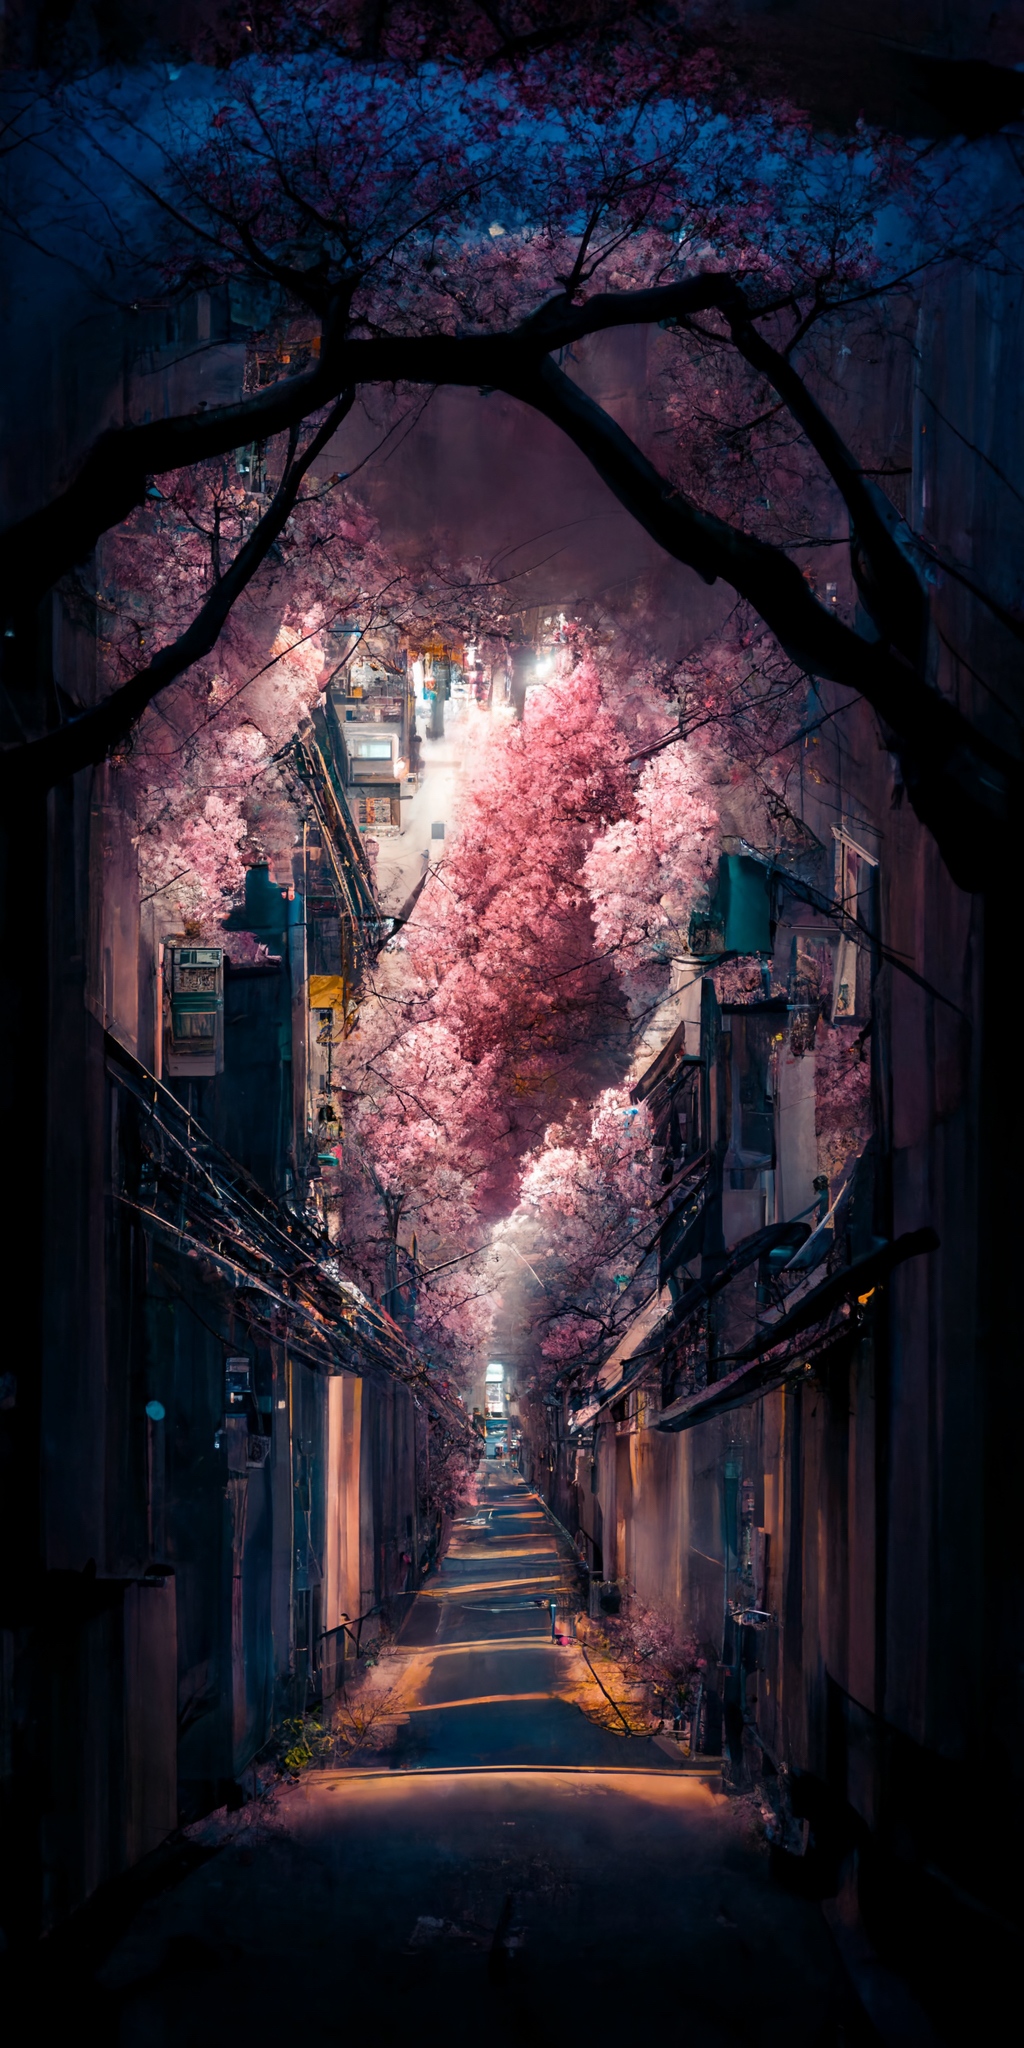 Bluewing_an_alley_in_Tokyo_with_cherry_blossoms_Sony_a7_III_Top_7796bd36-feba-45fb-b4ef-2232d77eb061.jpeg